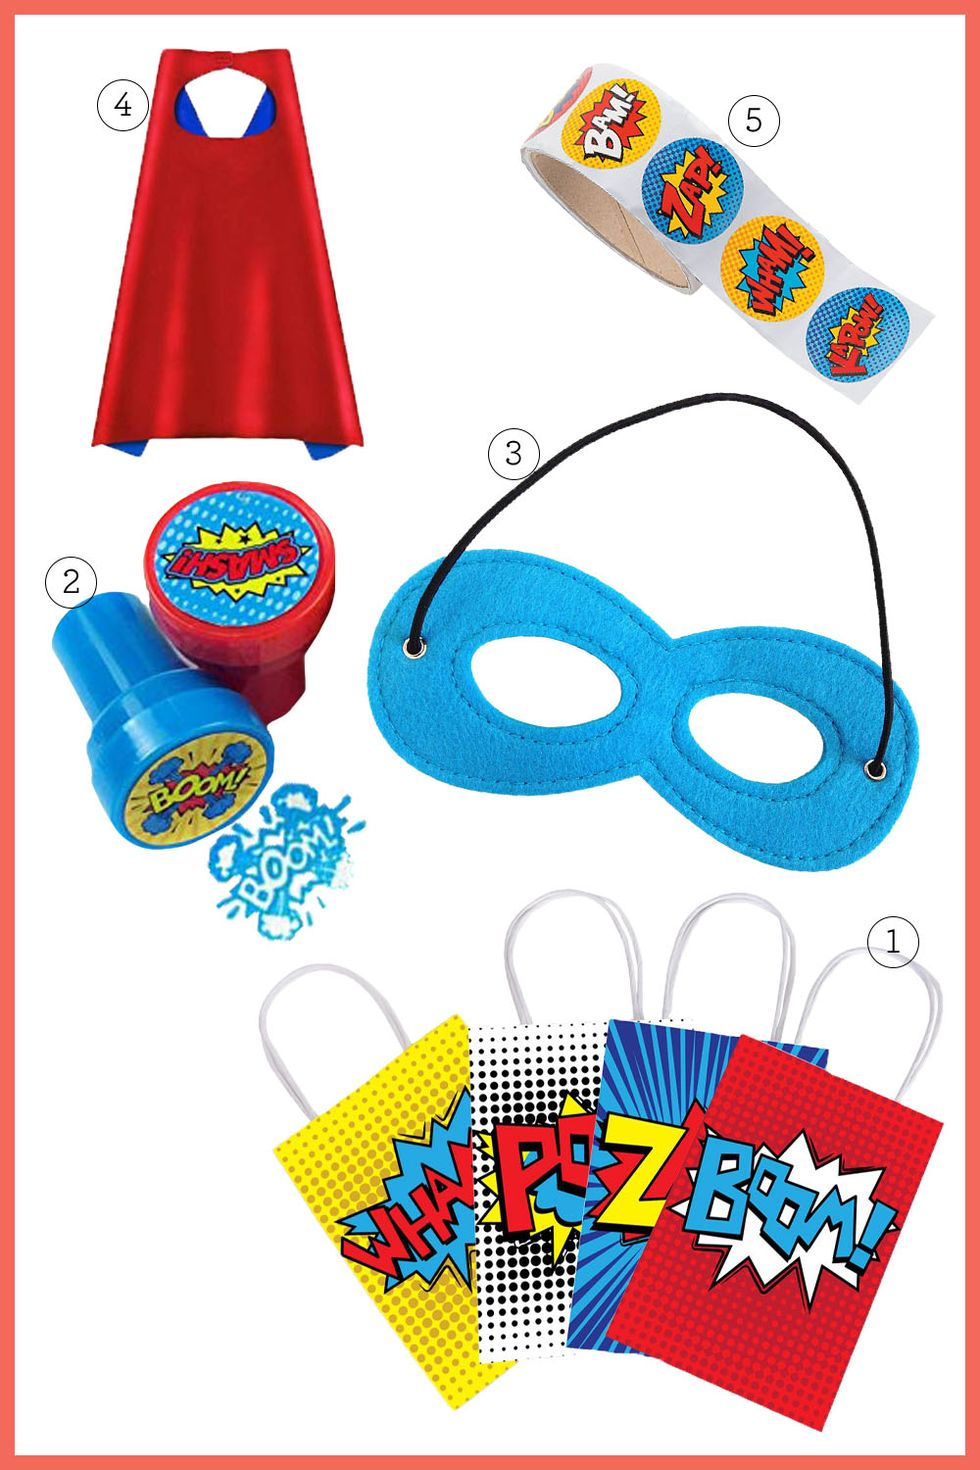 7 Things That Should REALLY Be in Kids' Goodie Bags